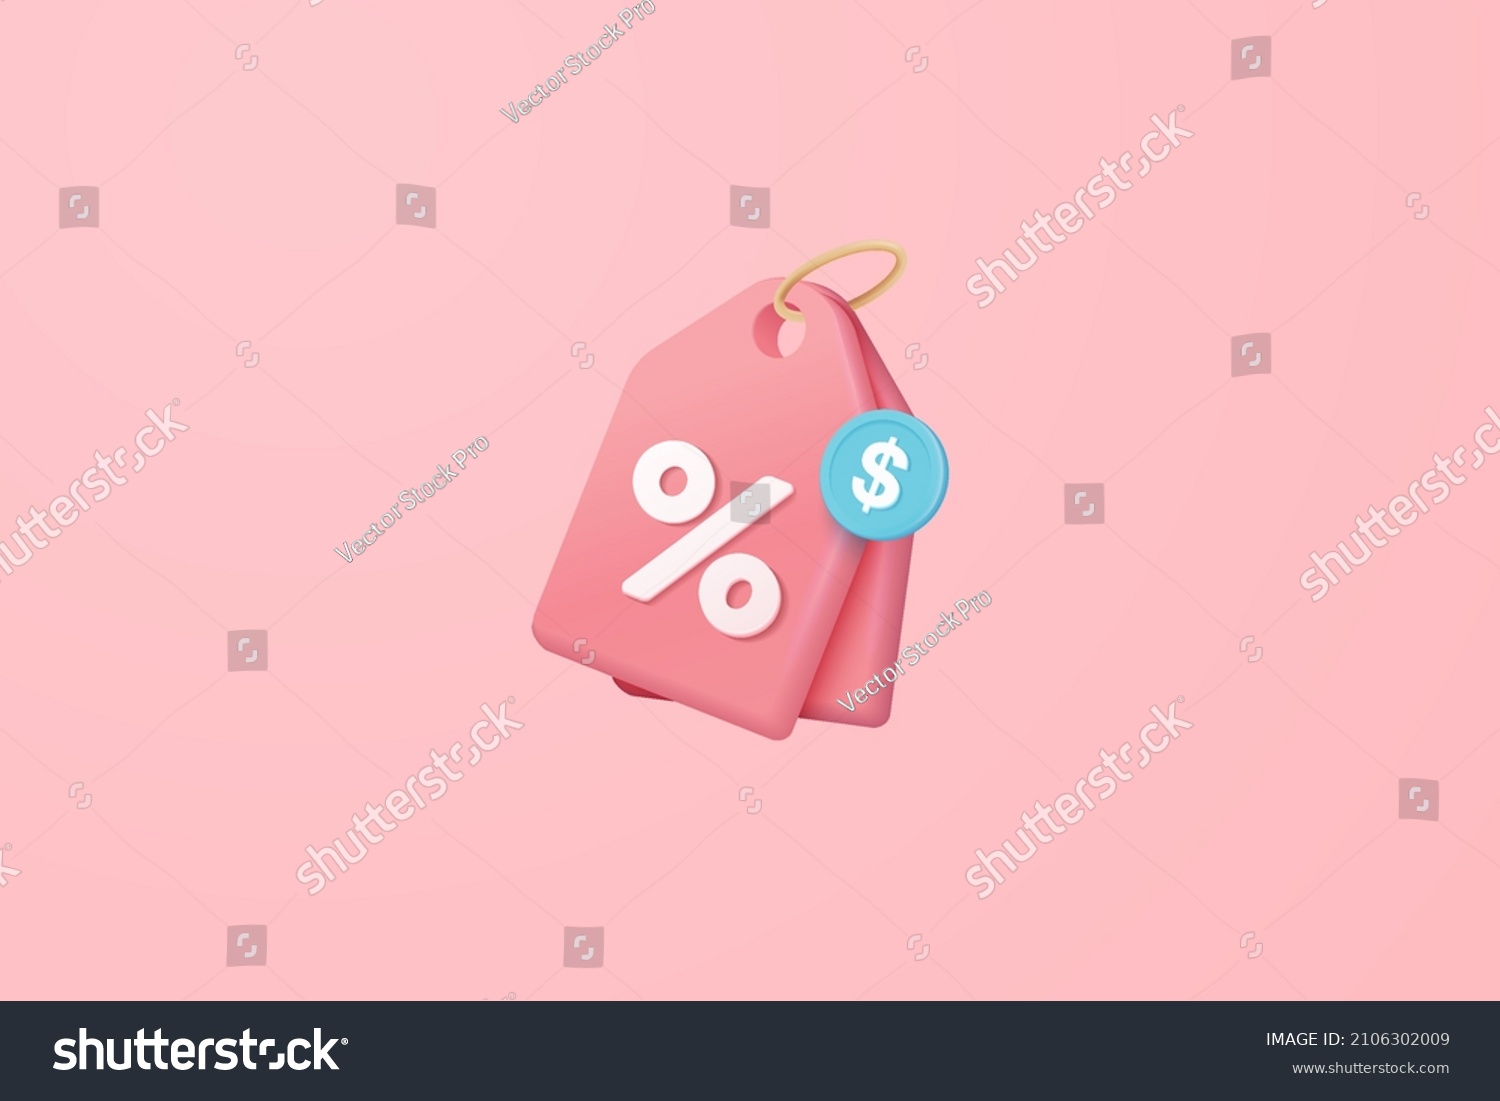 online shopping tag price 3d render vector, discount coupon of cash for future use. sales with an excellent offer 3d for shopping online, Special offer promotion on 3d price tags on pink background #2106302009